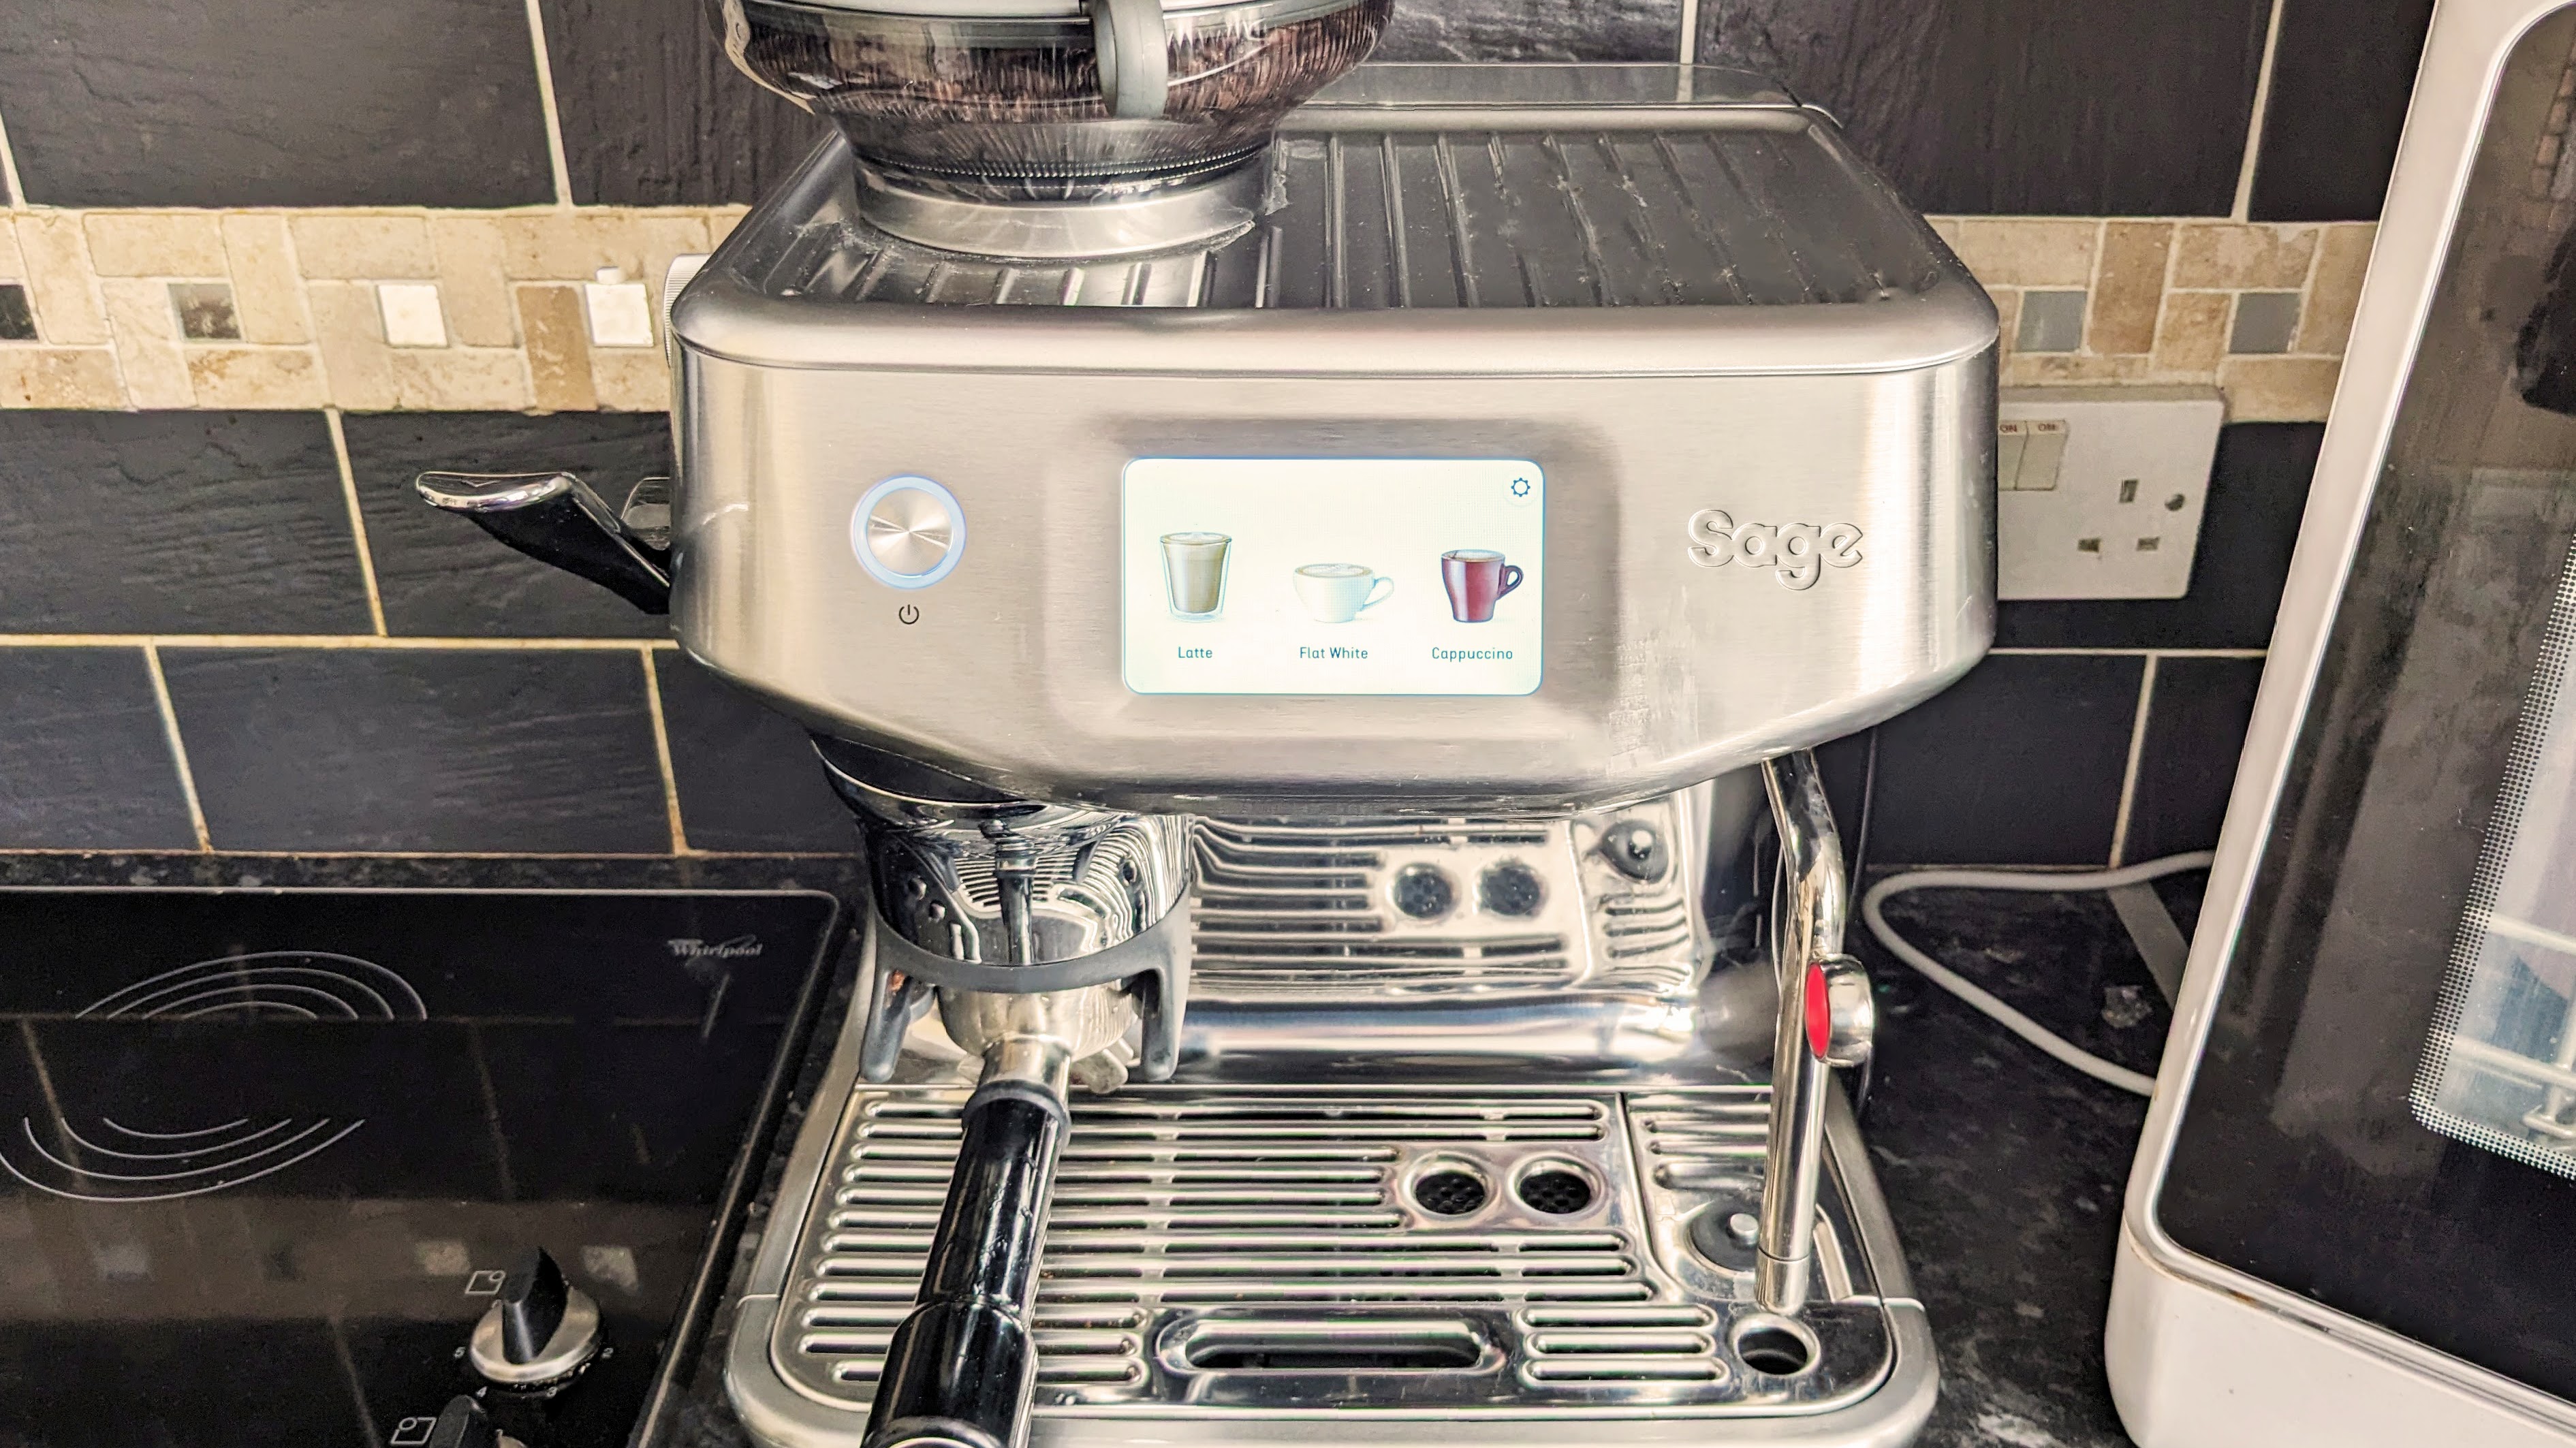 Sage Barista Express Impress - For the real coffee enthusiast